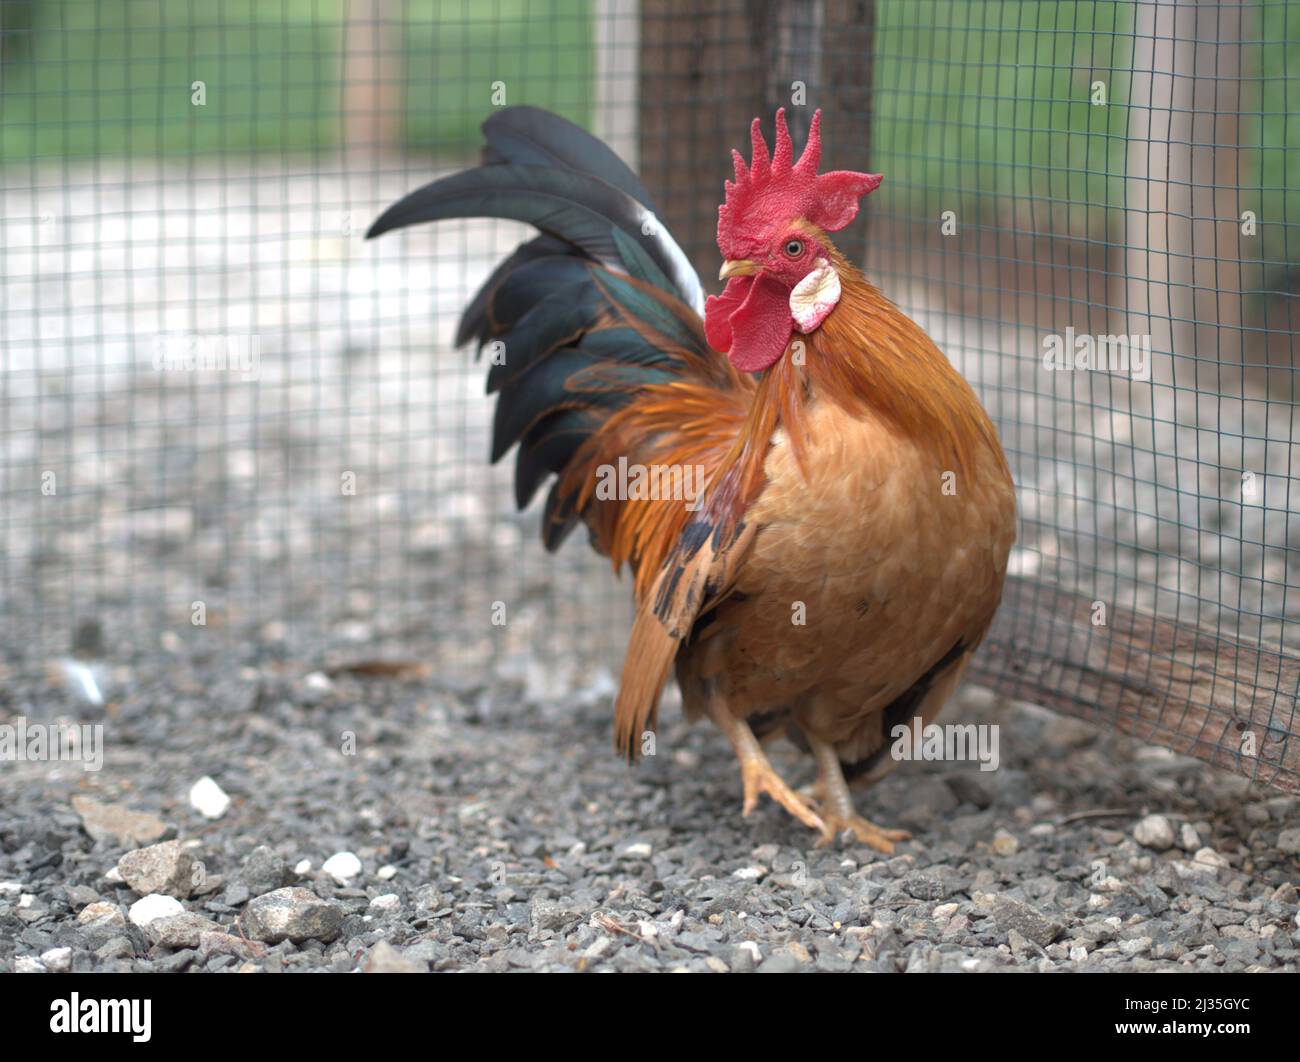 Bantam Rooster Chicken Beautiful Close Up with Natural Farm Background Stock Photo